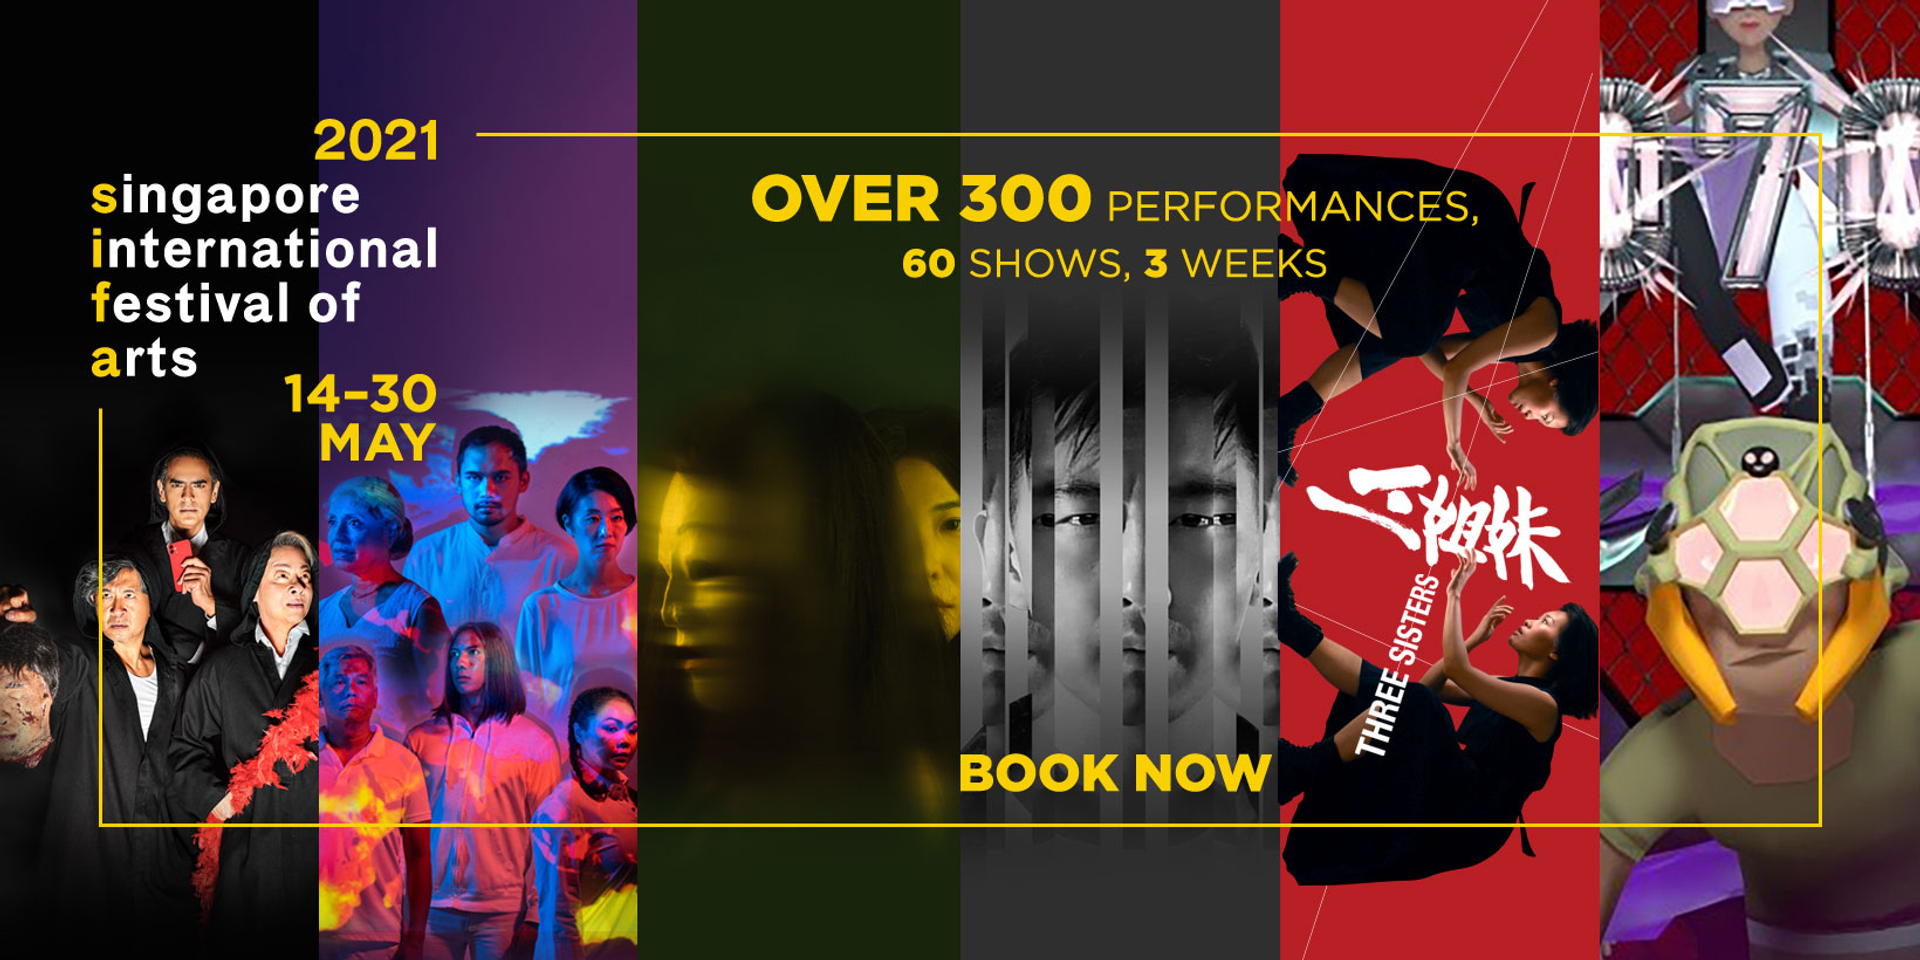 Singapore International Festival of Arts returns to explore "care, compassion, and community" in 2021 summer programmes and exhibitions